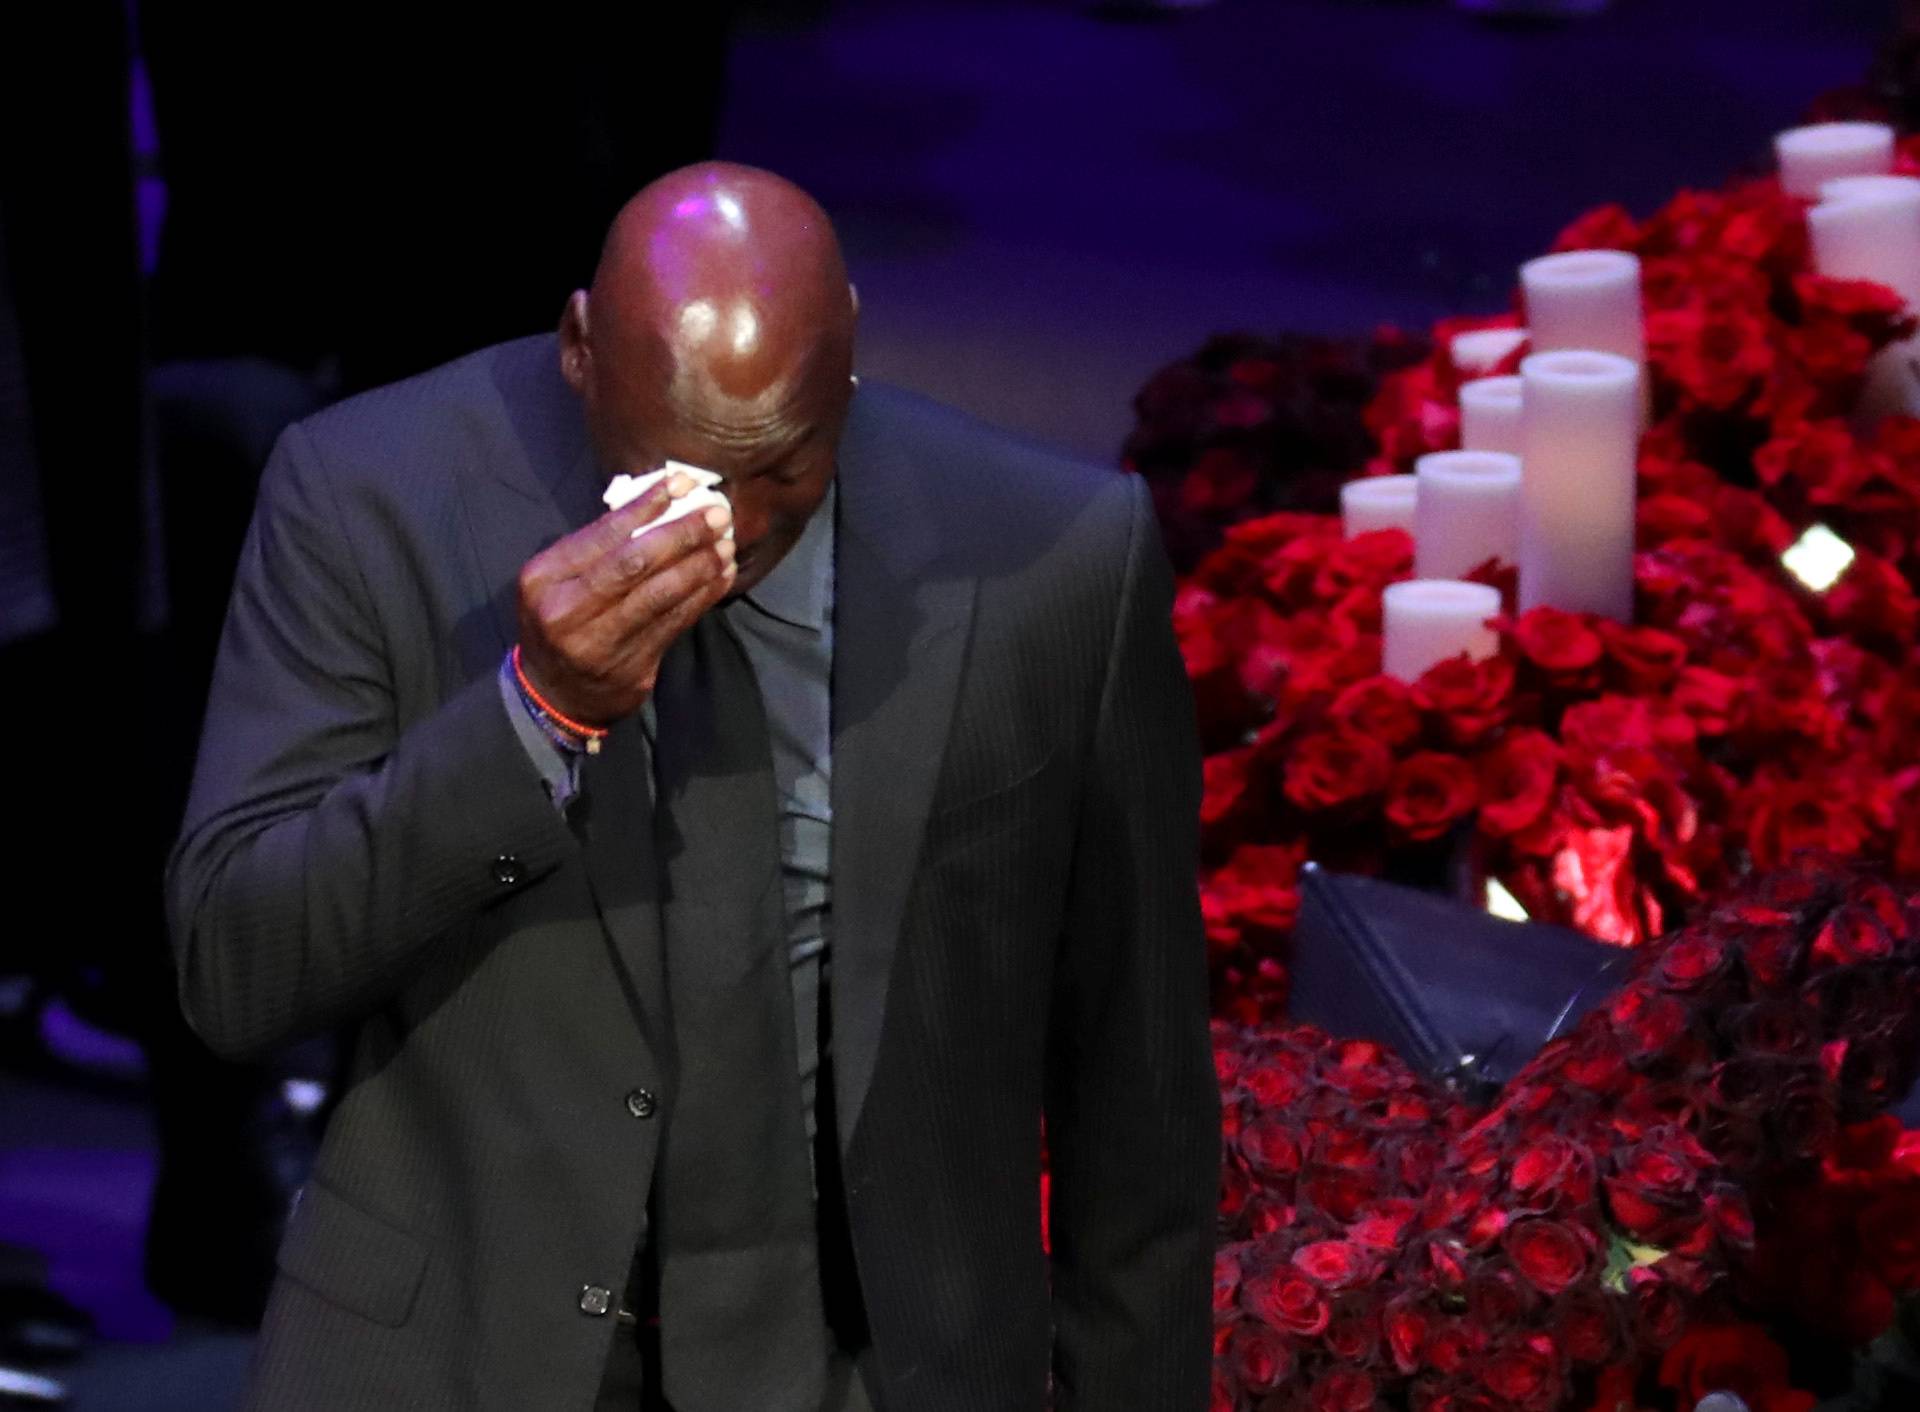 Public memorial for NBA great Kobe Bryant, his daughter Gianna and seven others killed in a helicopter crash on January 26, at the Staples Center in Los Angeles, California